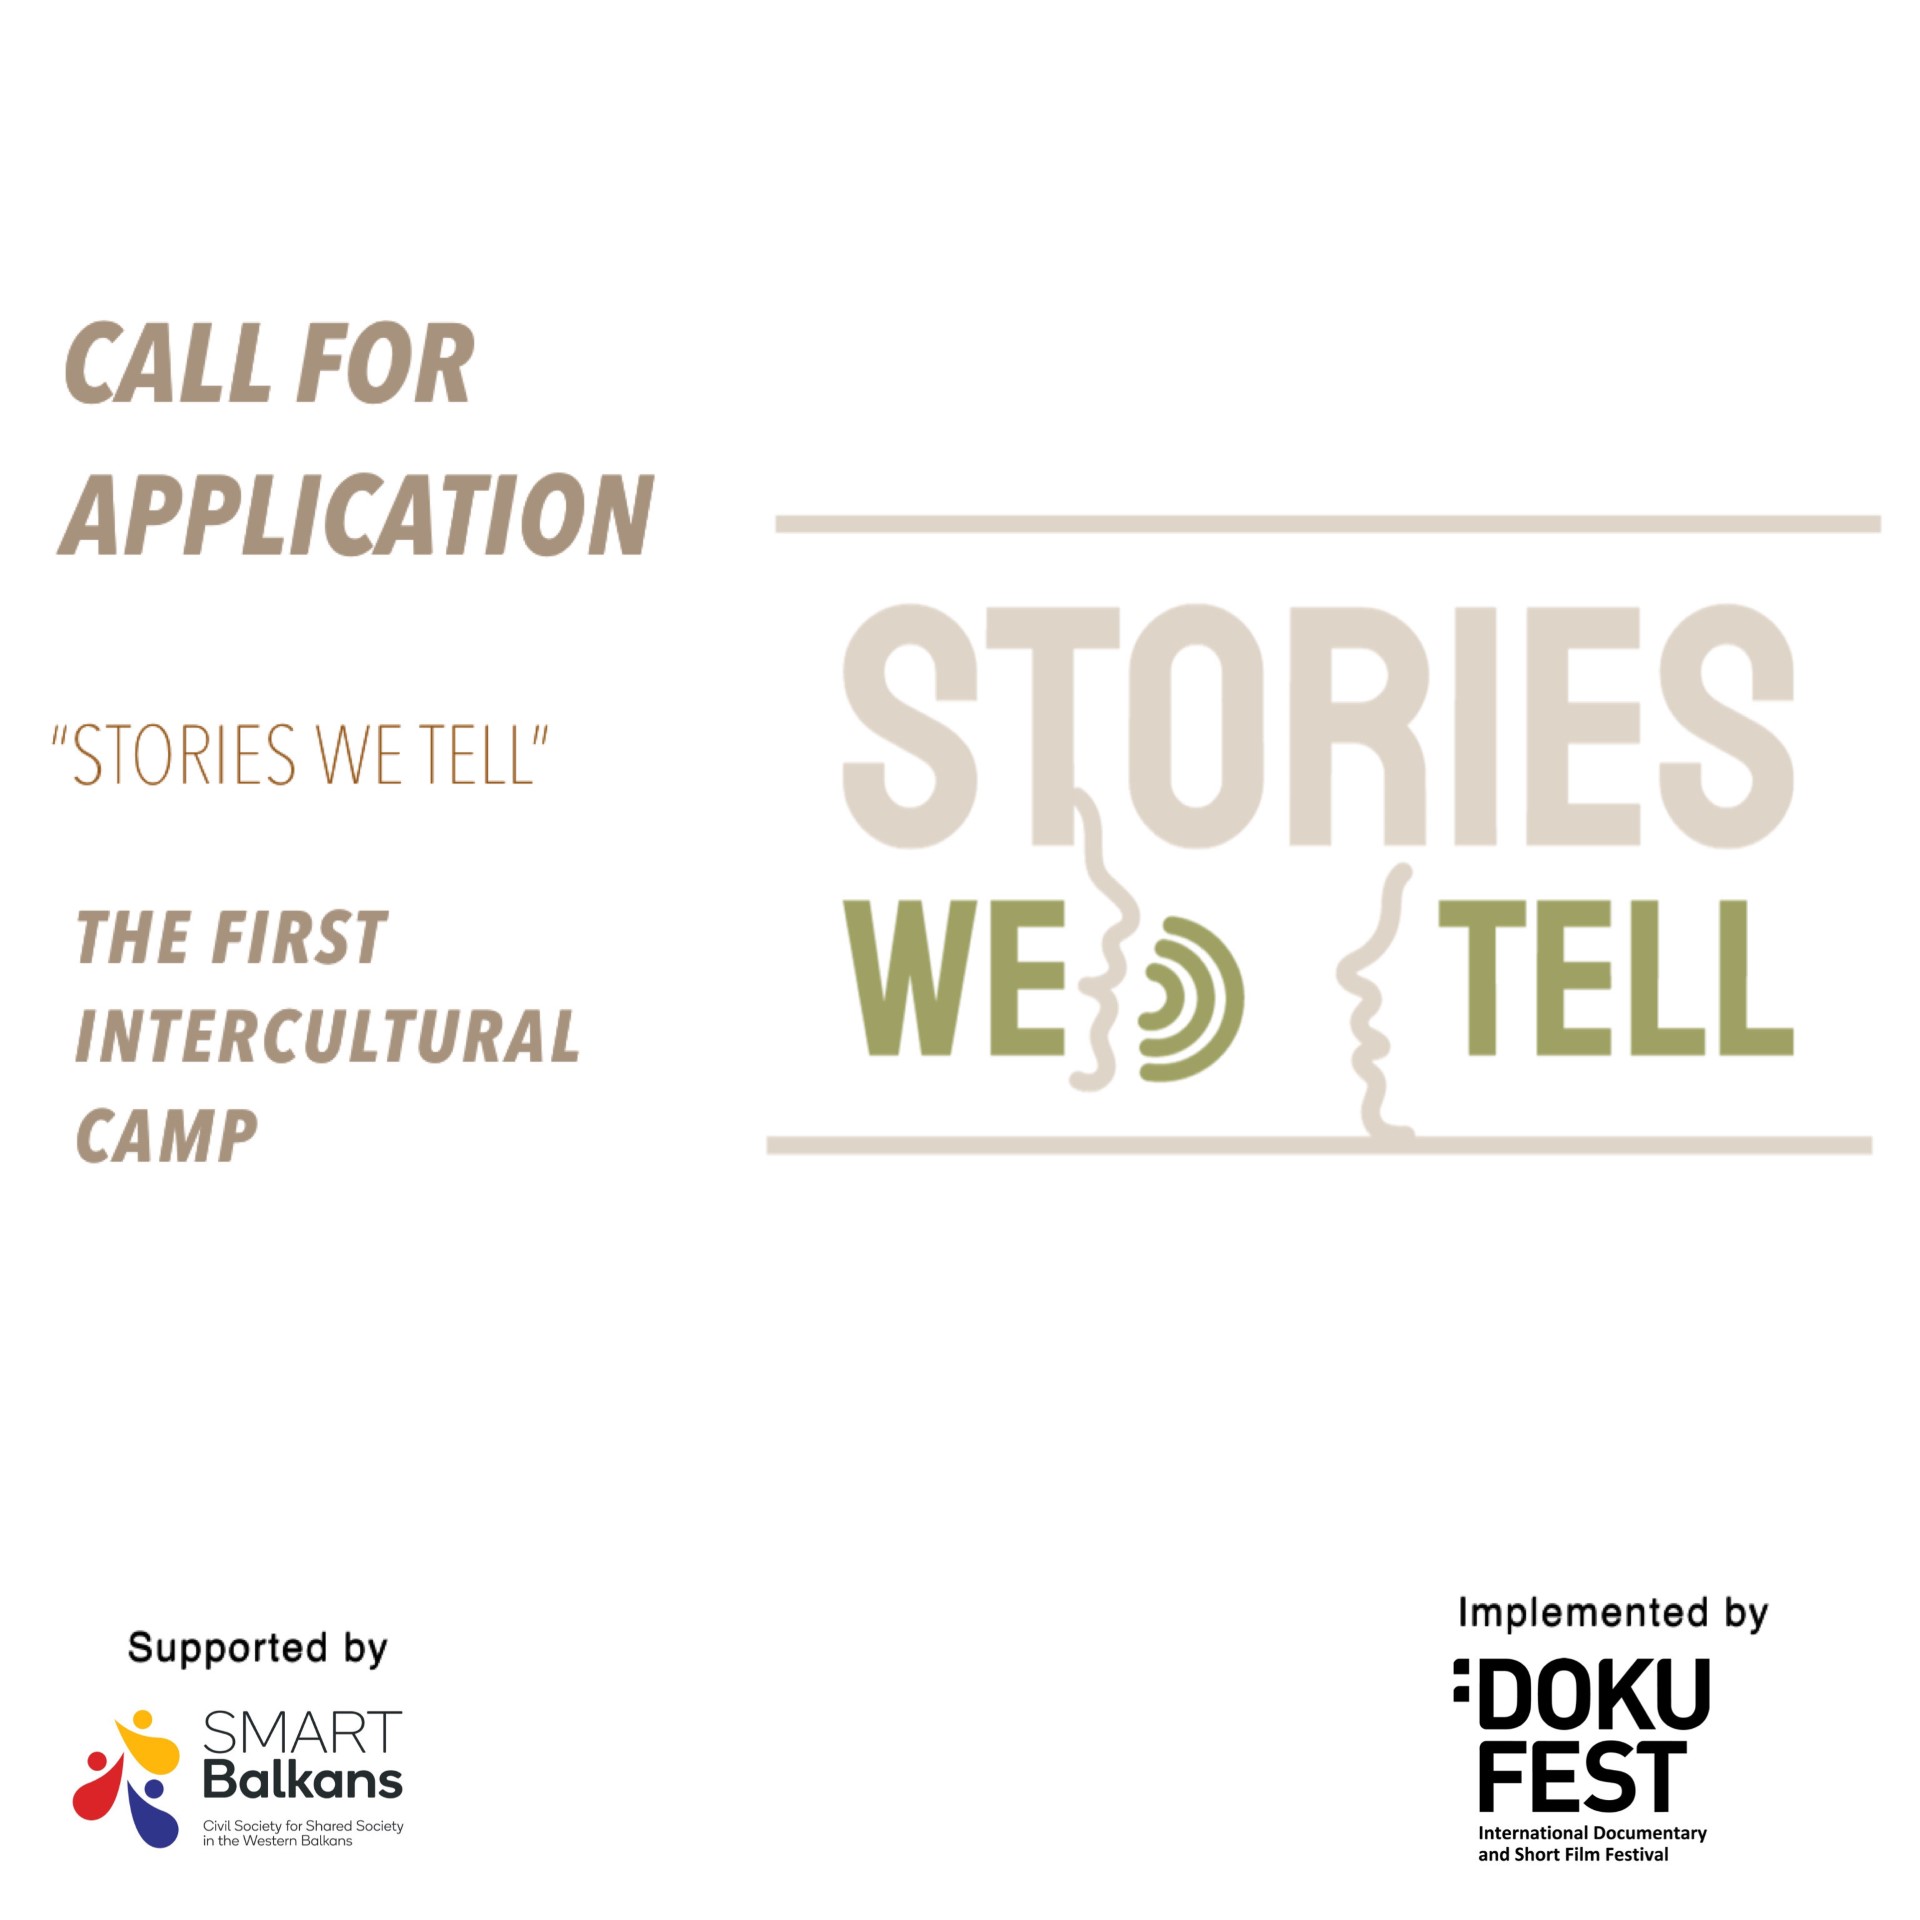 CALL FOR APPLICATION – THE FIRST INTERCULTURAL CAMP “STORIES WE TELL”